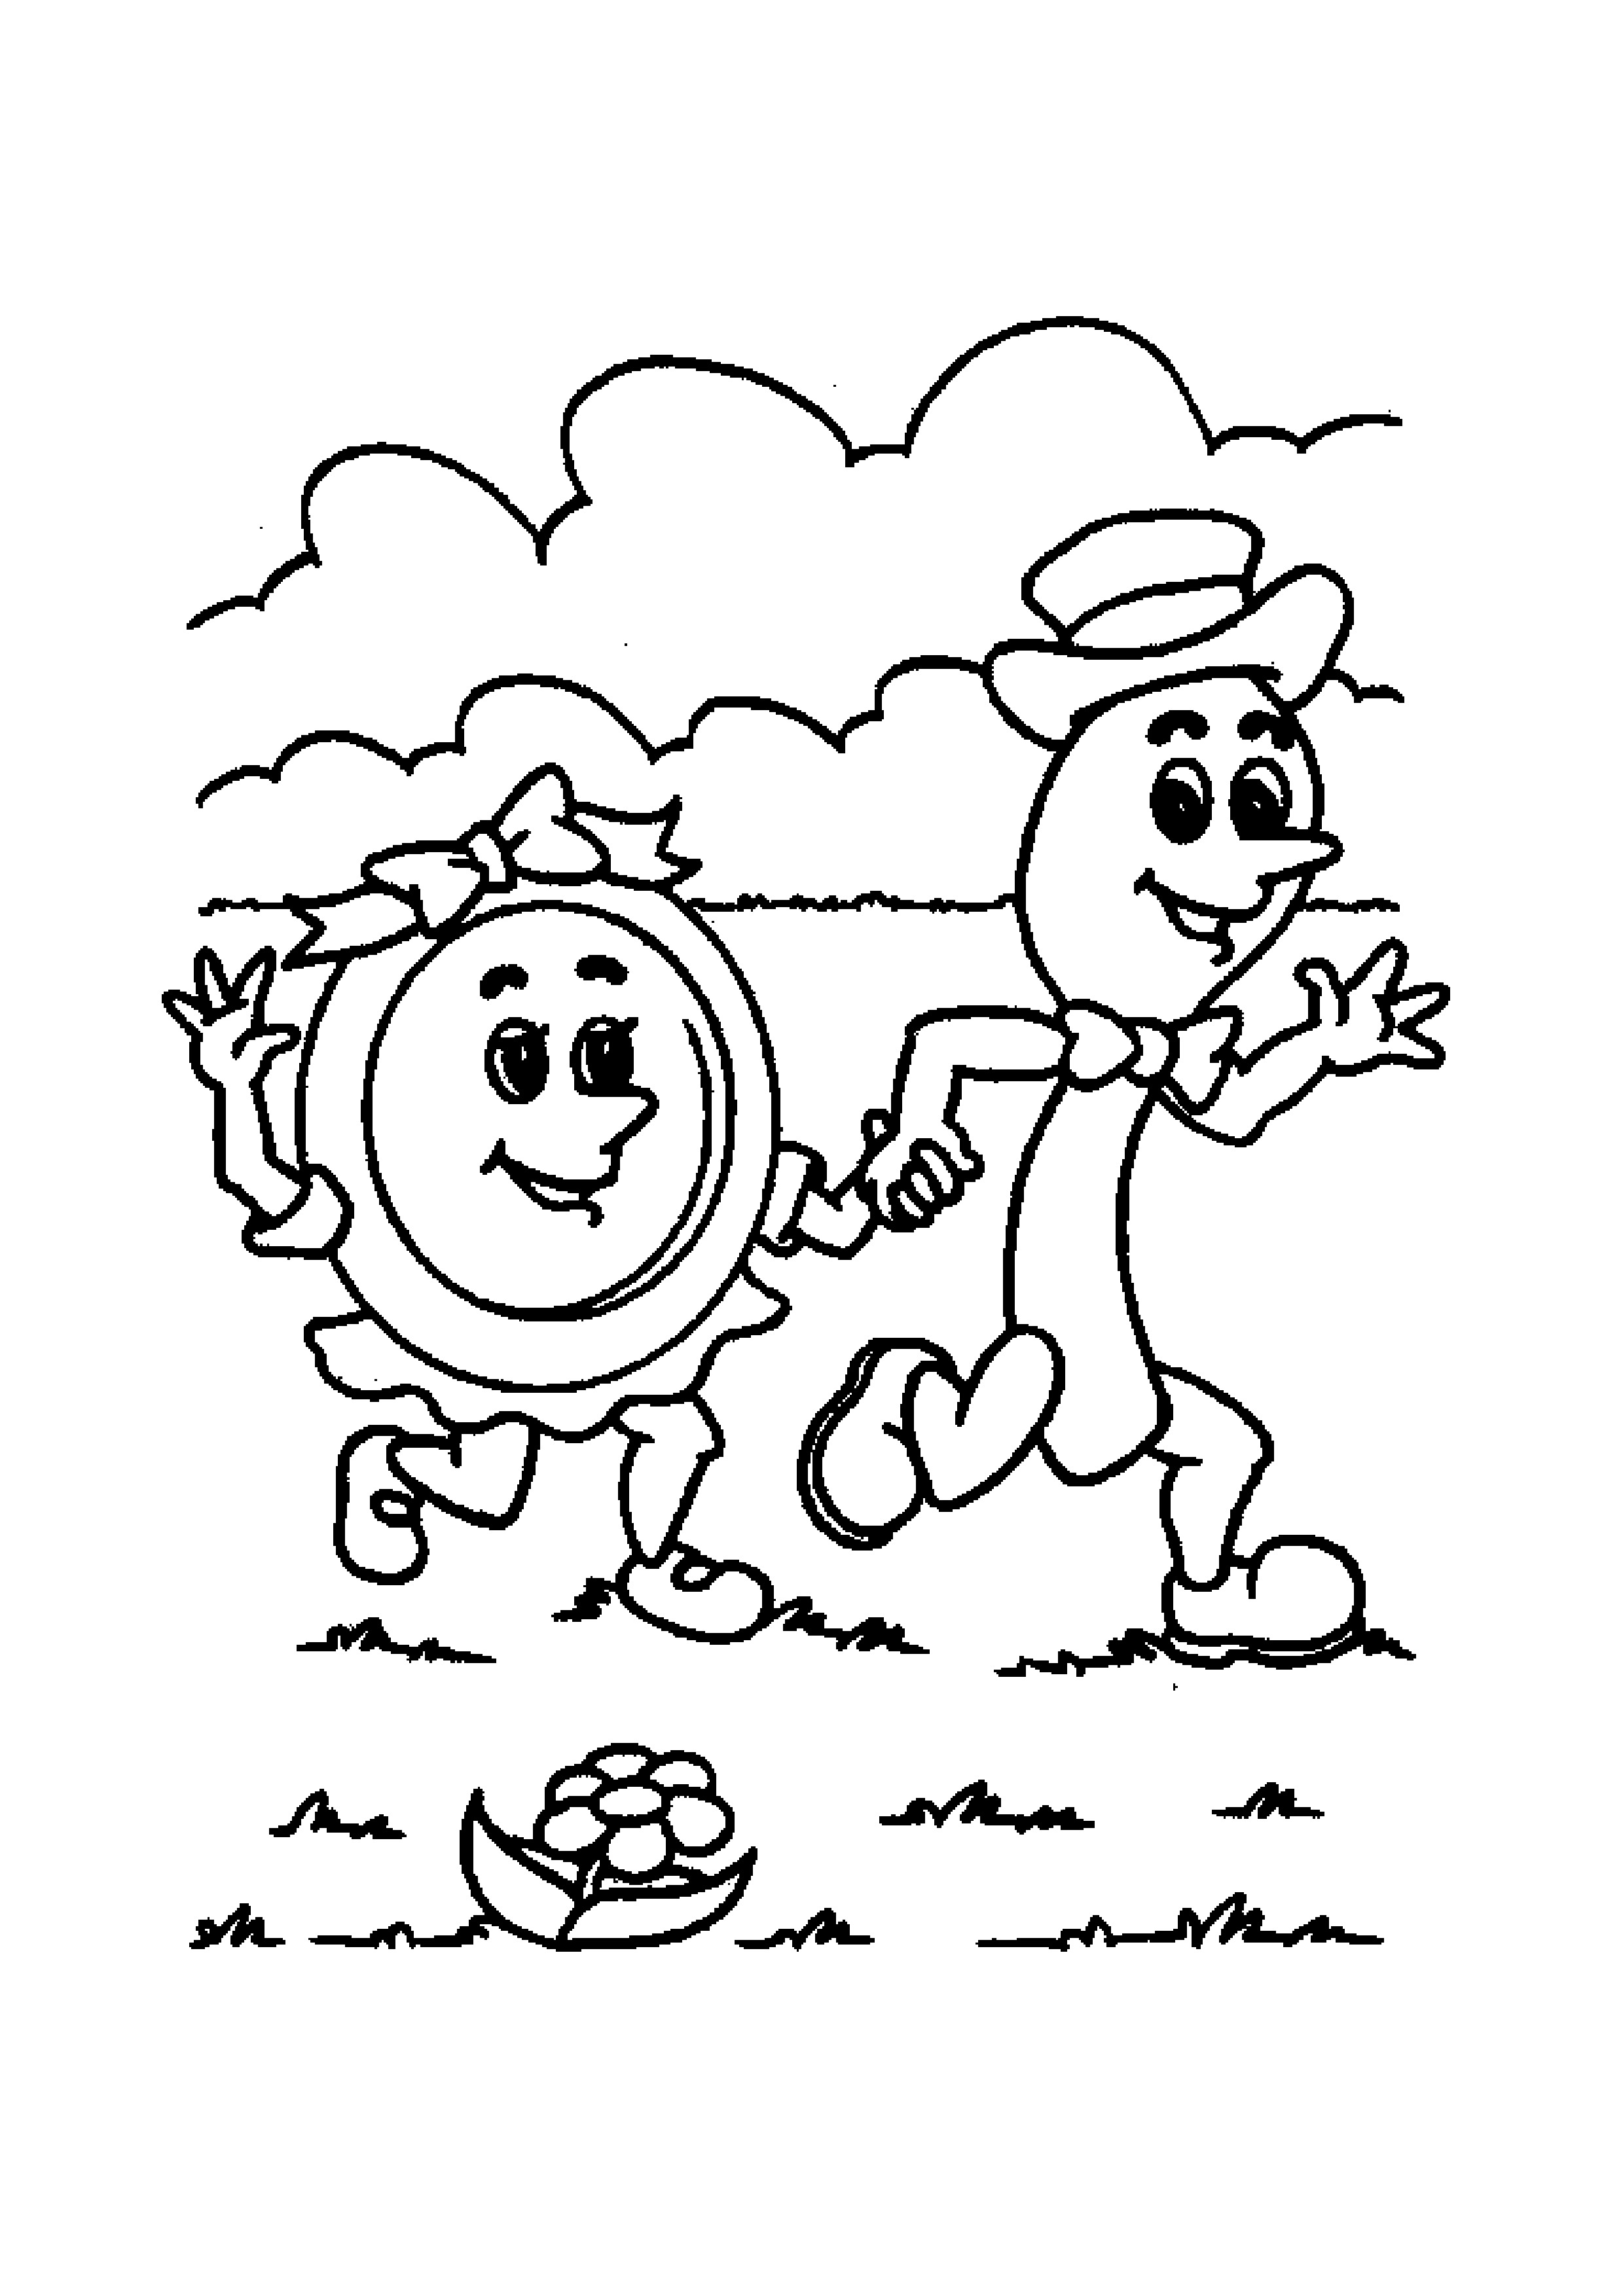 nursery-rhyme-coloring-pages-at-getcolorings-free-printable-colorings-pages-to-print-and-color